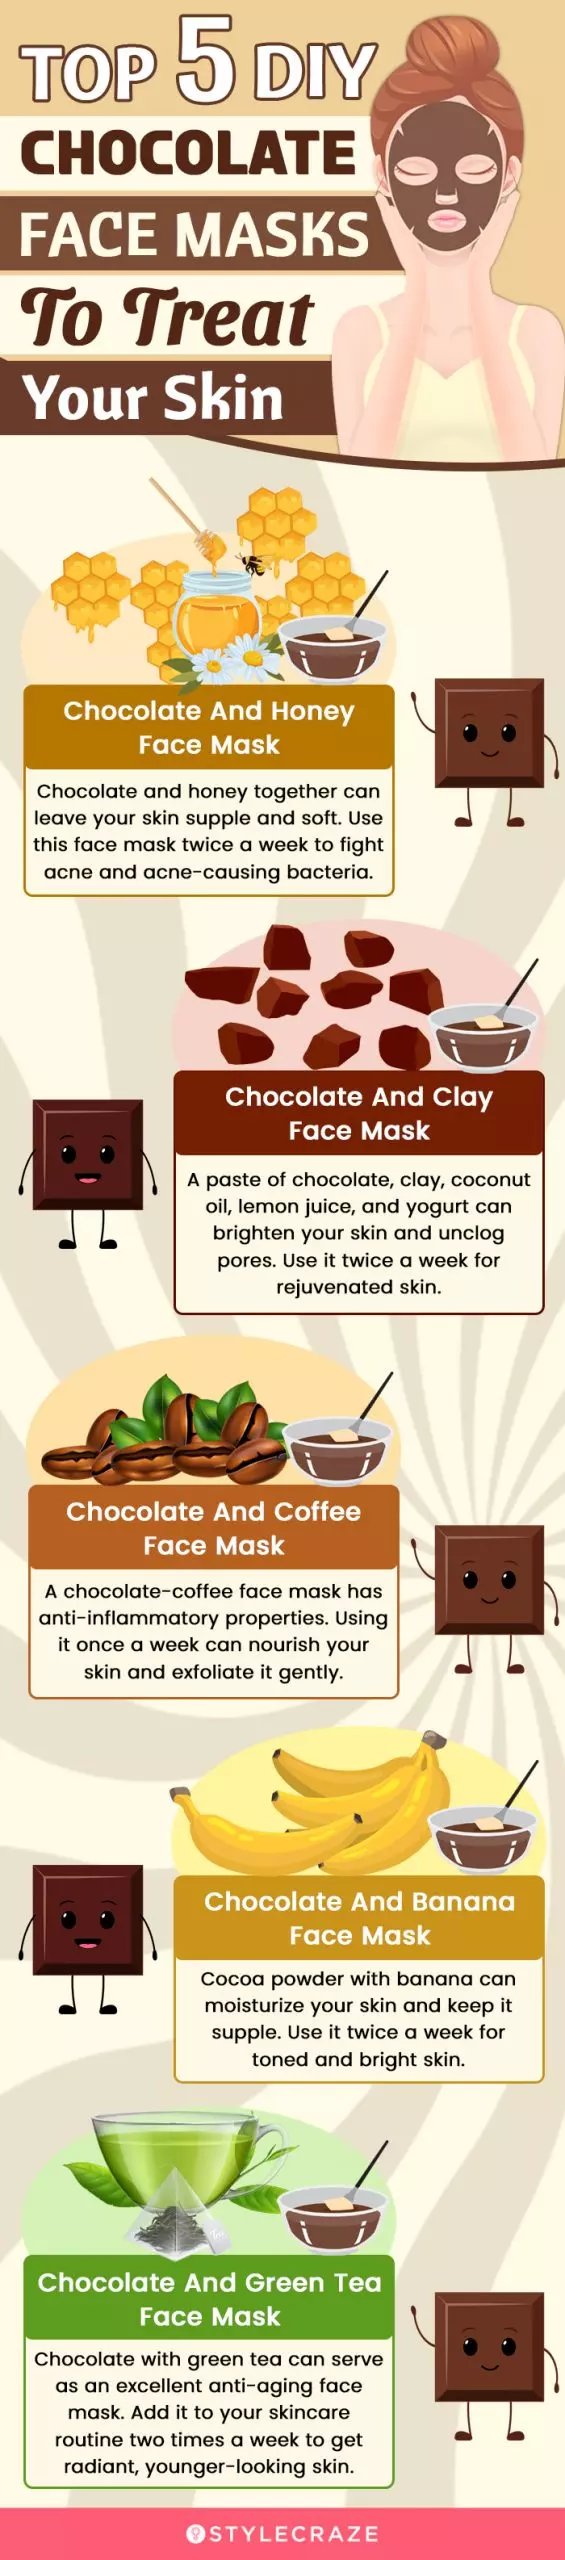 Top 5 DIY Chocolate Face Masks To Treat Your Skin (infographic)